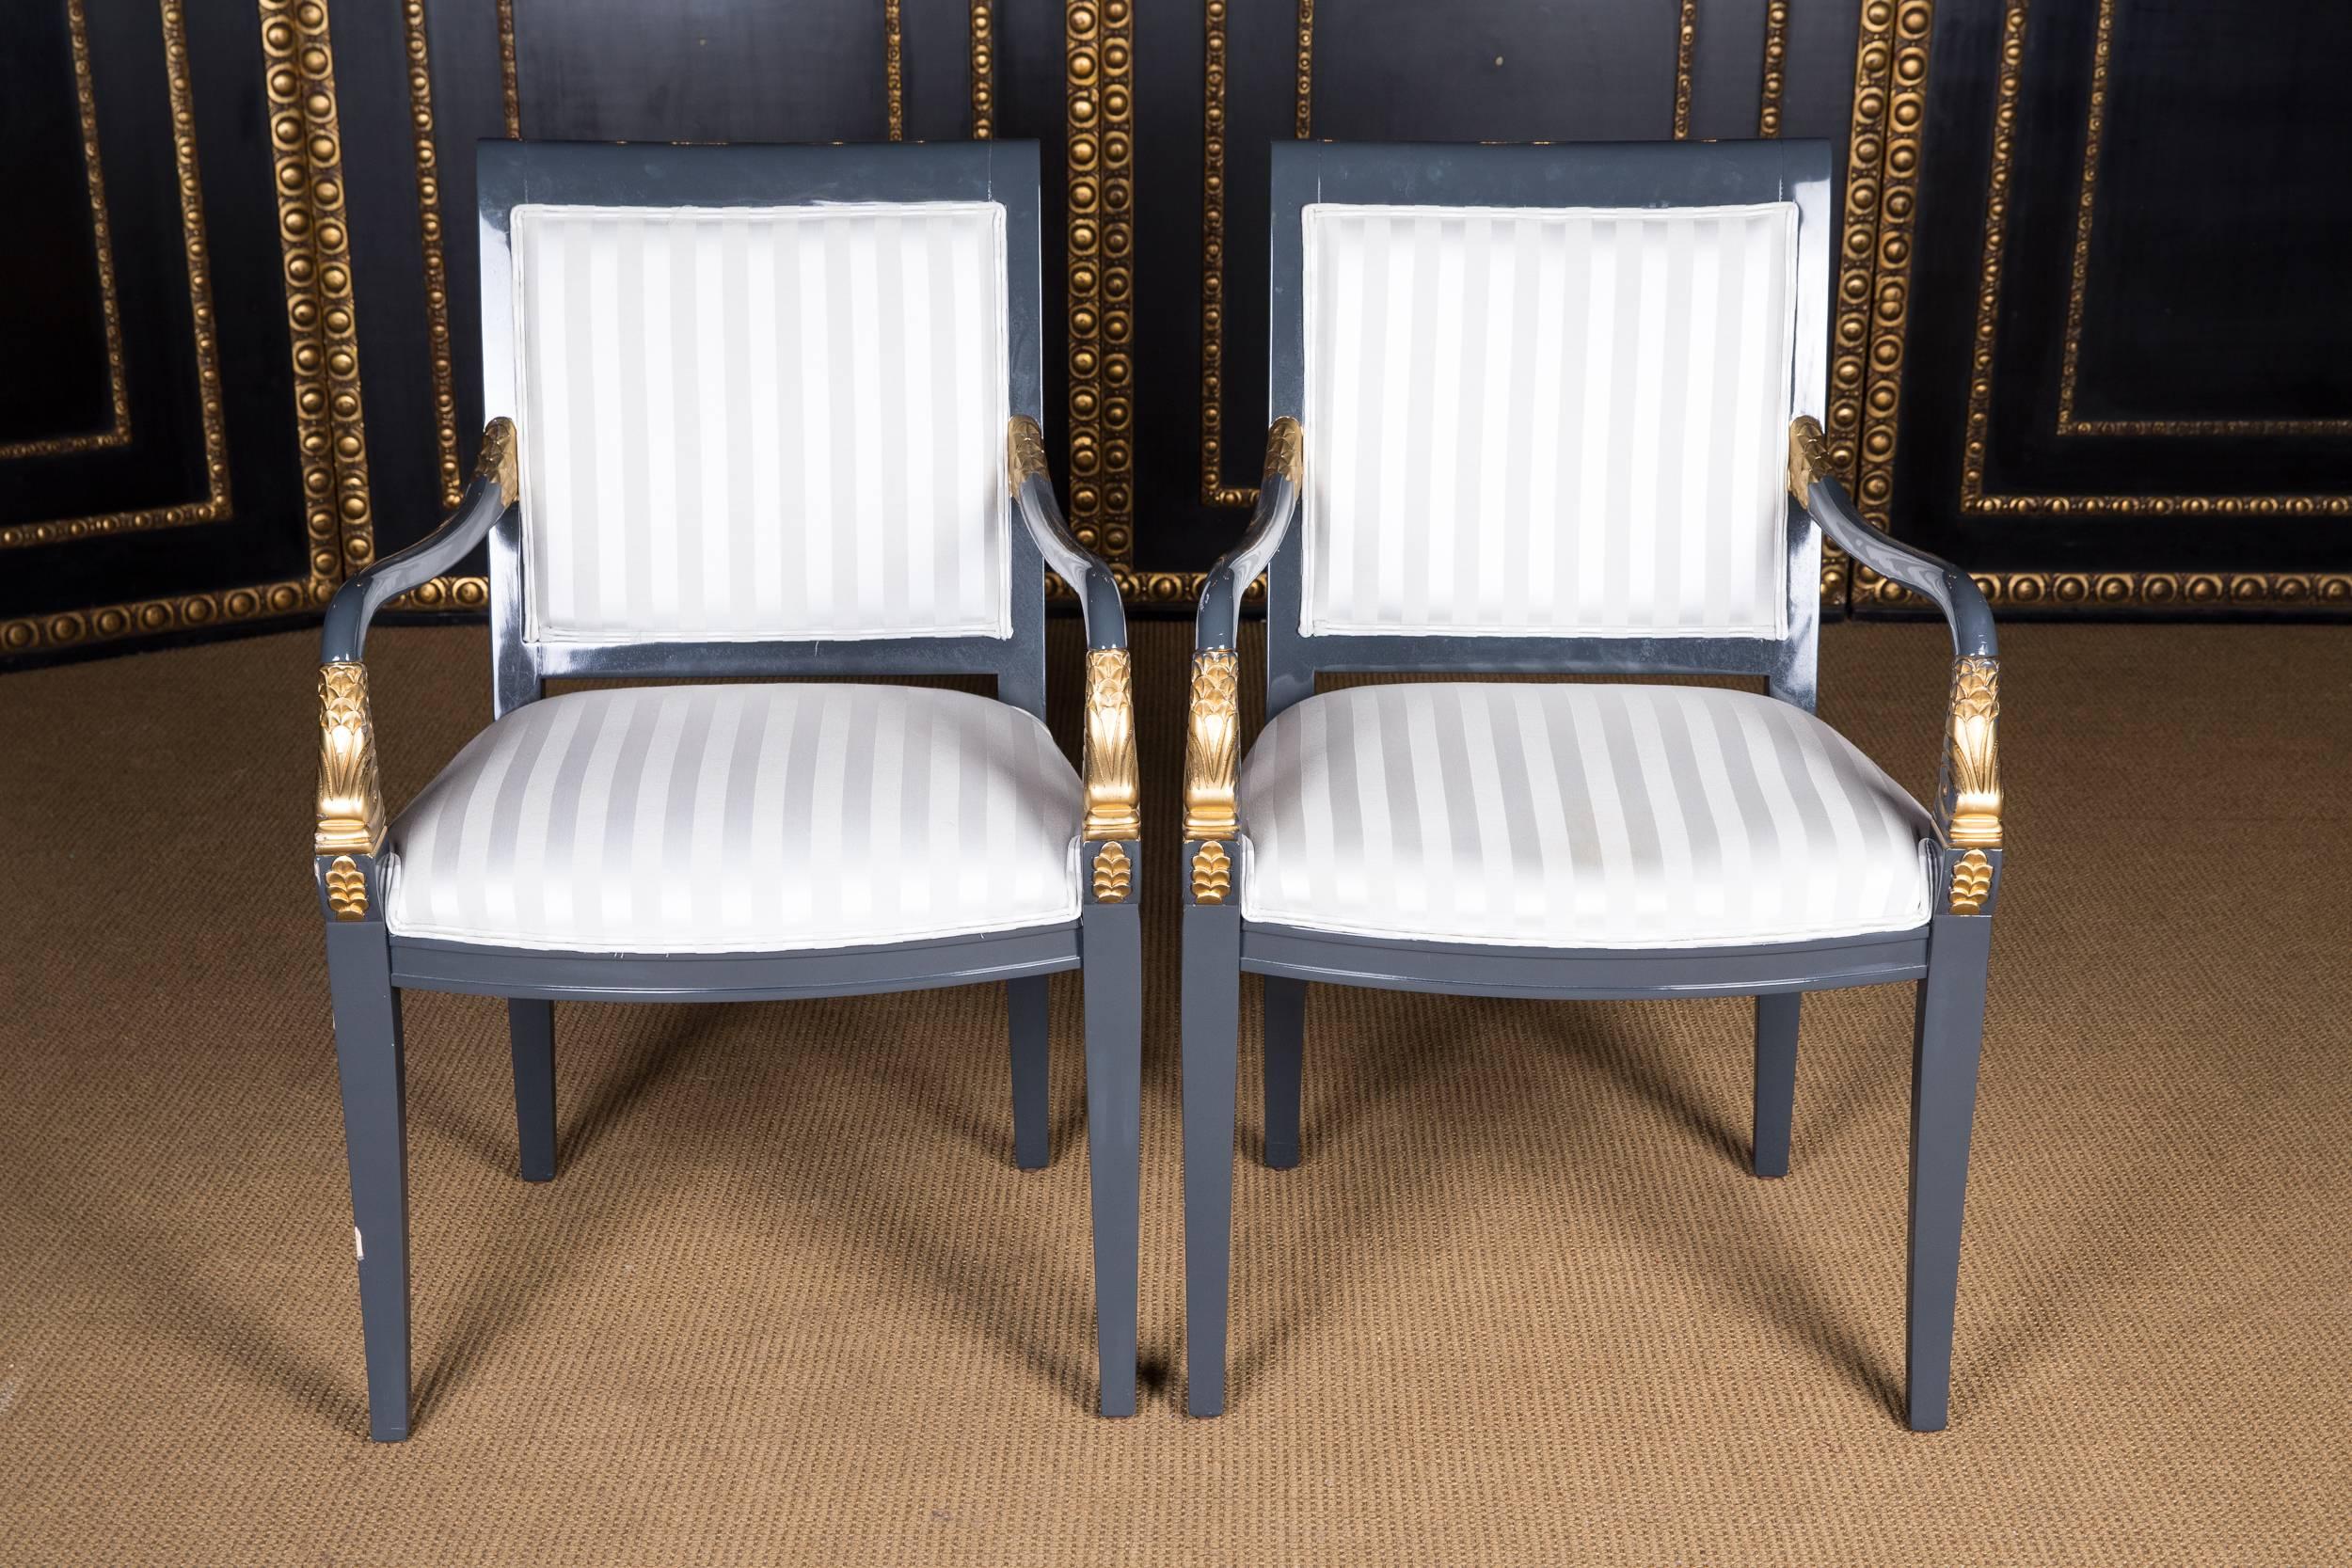 4 high quality armchairs from Italy with gold trim. Classic upholstery. High quality, striped cover.

Made in Italy.

Originates from a Berlin estate.